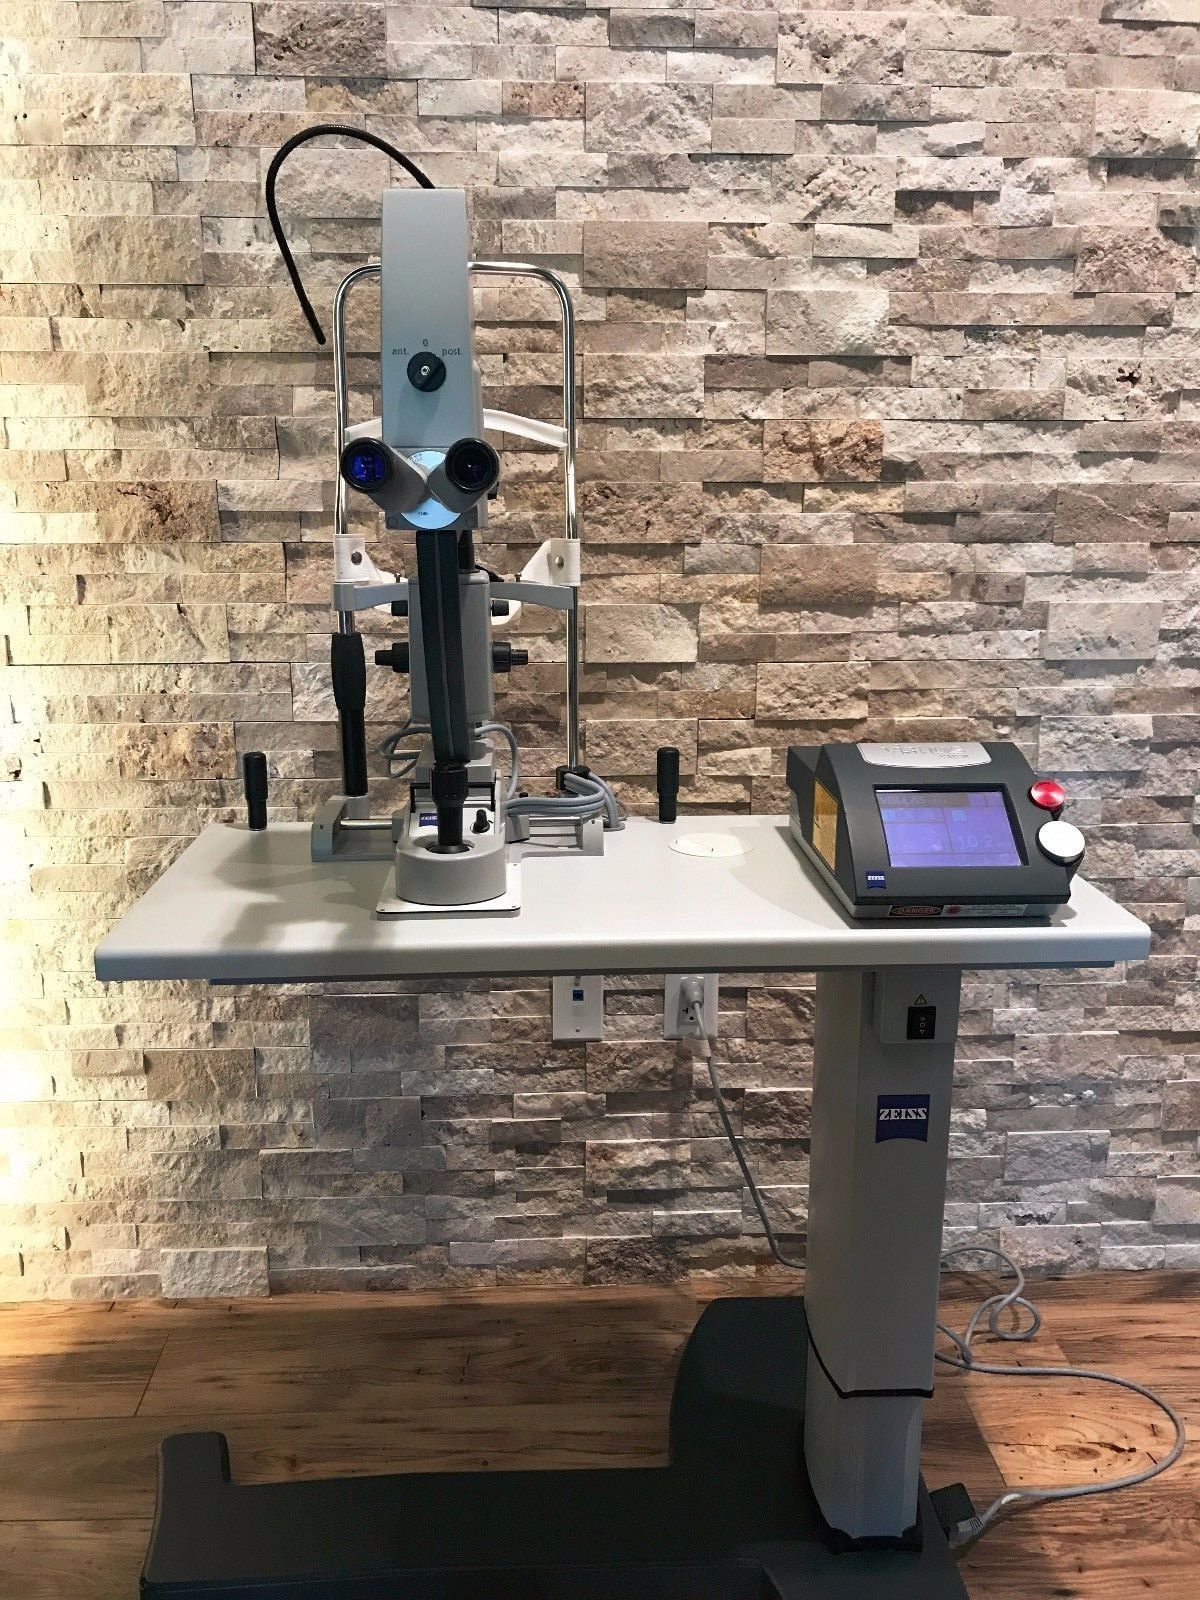 Zeiss Visulas Yag 3 Laserex Ellex 3000LX Ophthalmic YAG Laser with Power Table Manual and Warranty